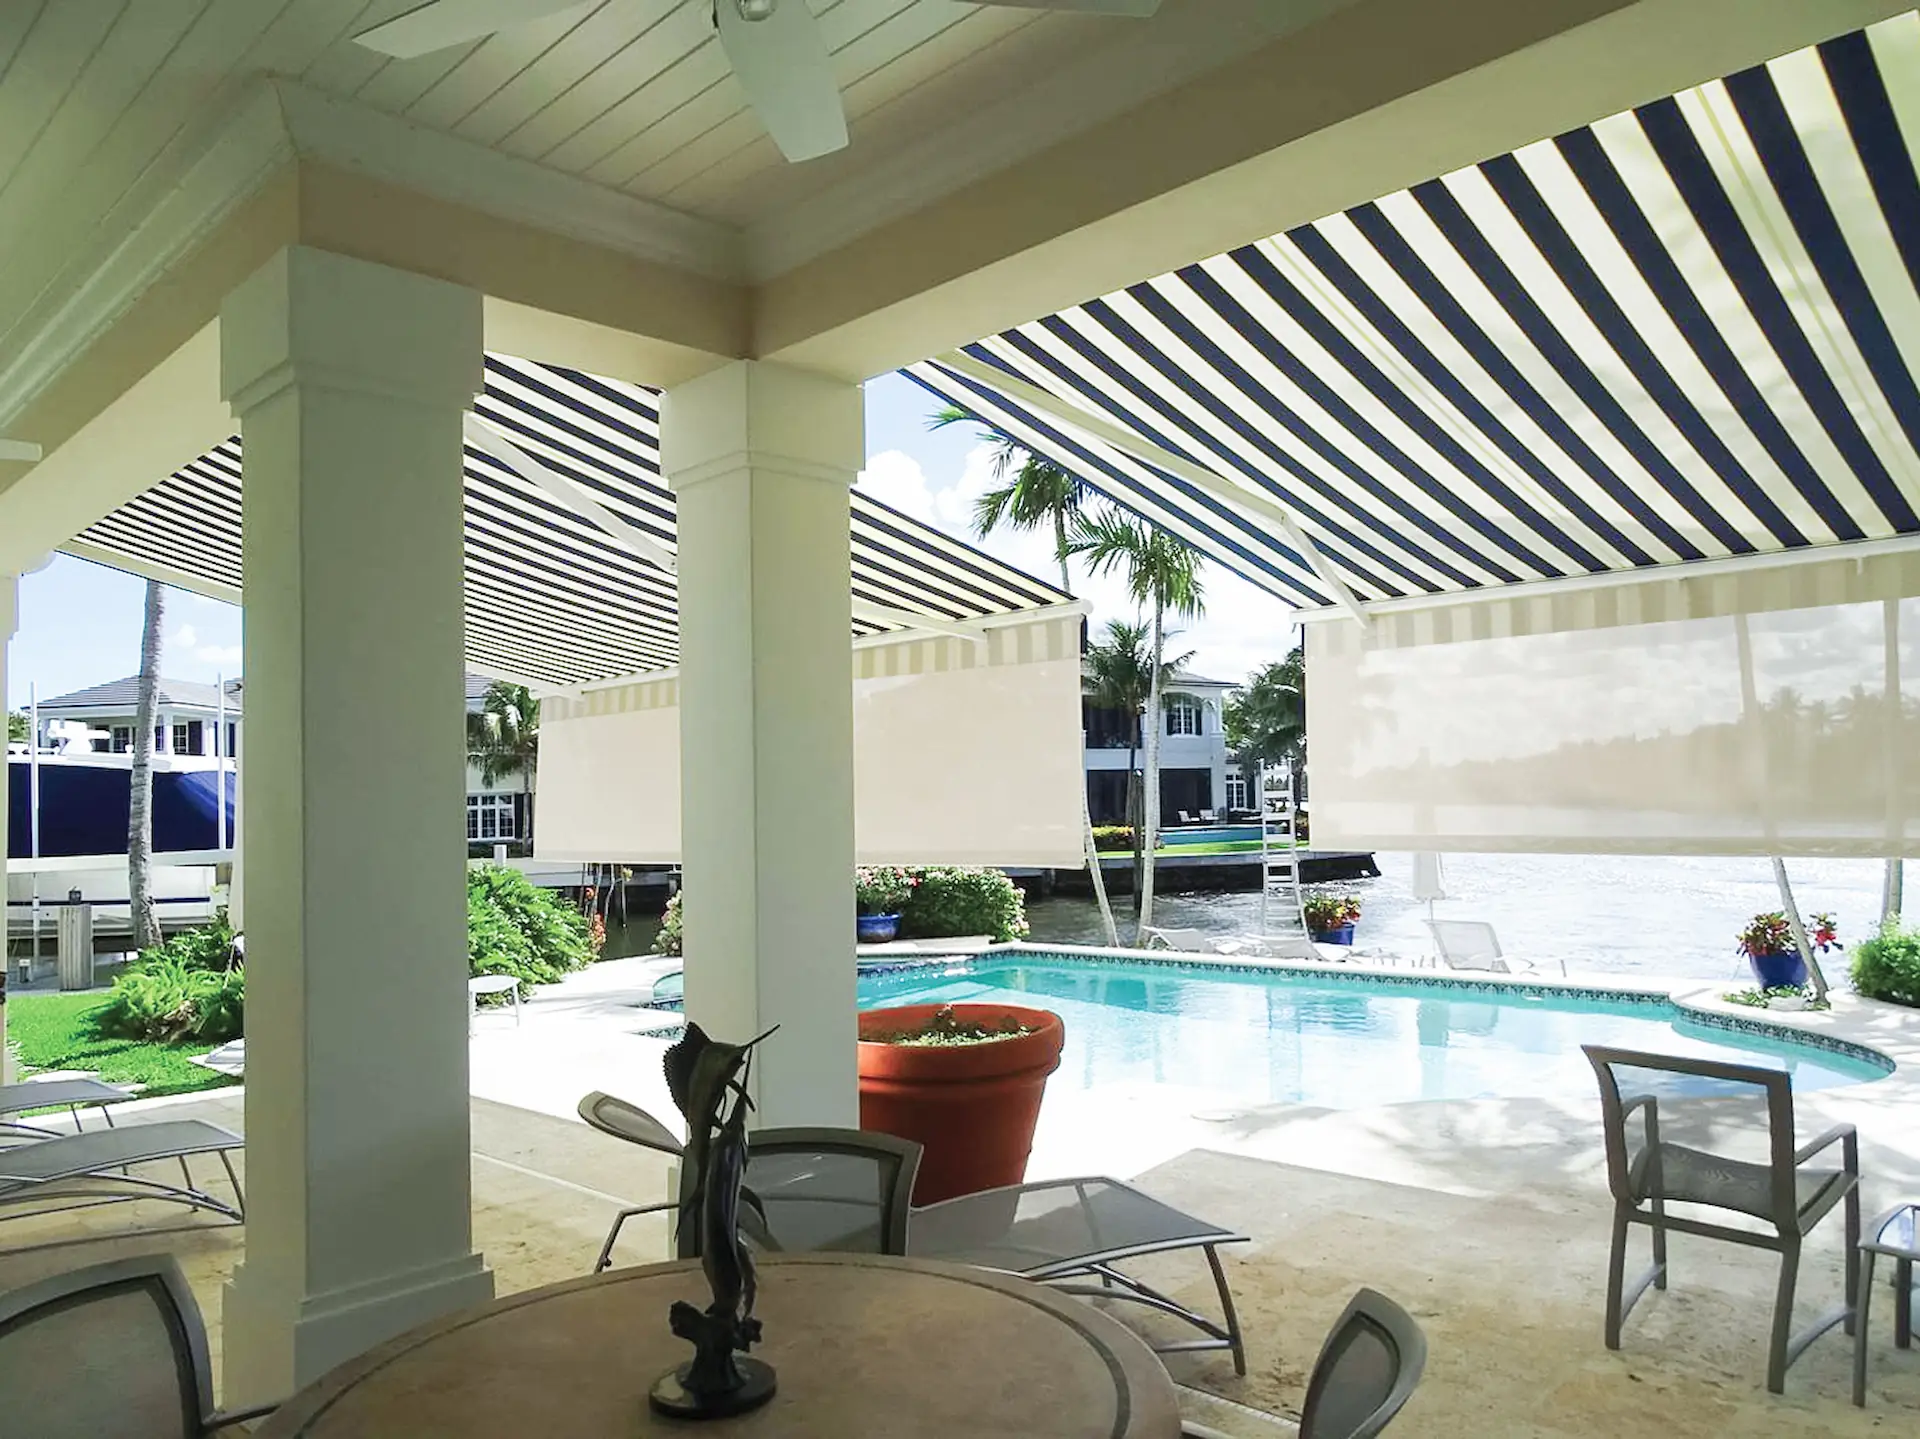 Interior shot of 2 retractable awnings with blue and white stripes extended on an elegant pool deck.